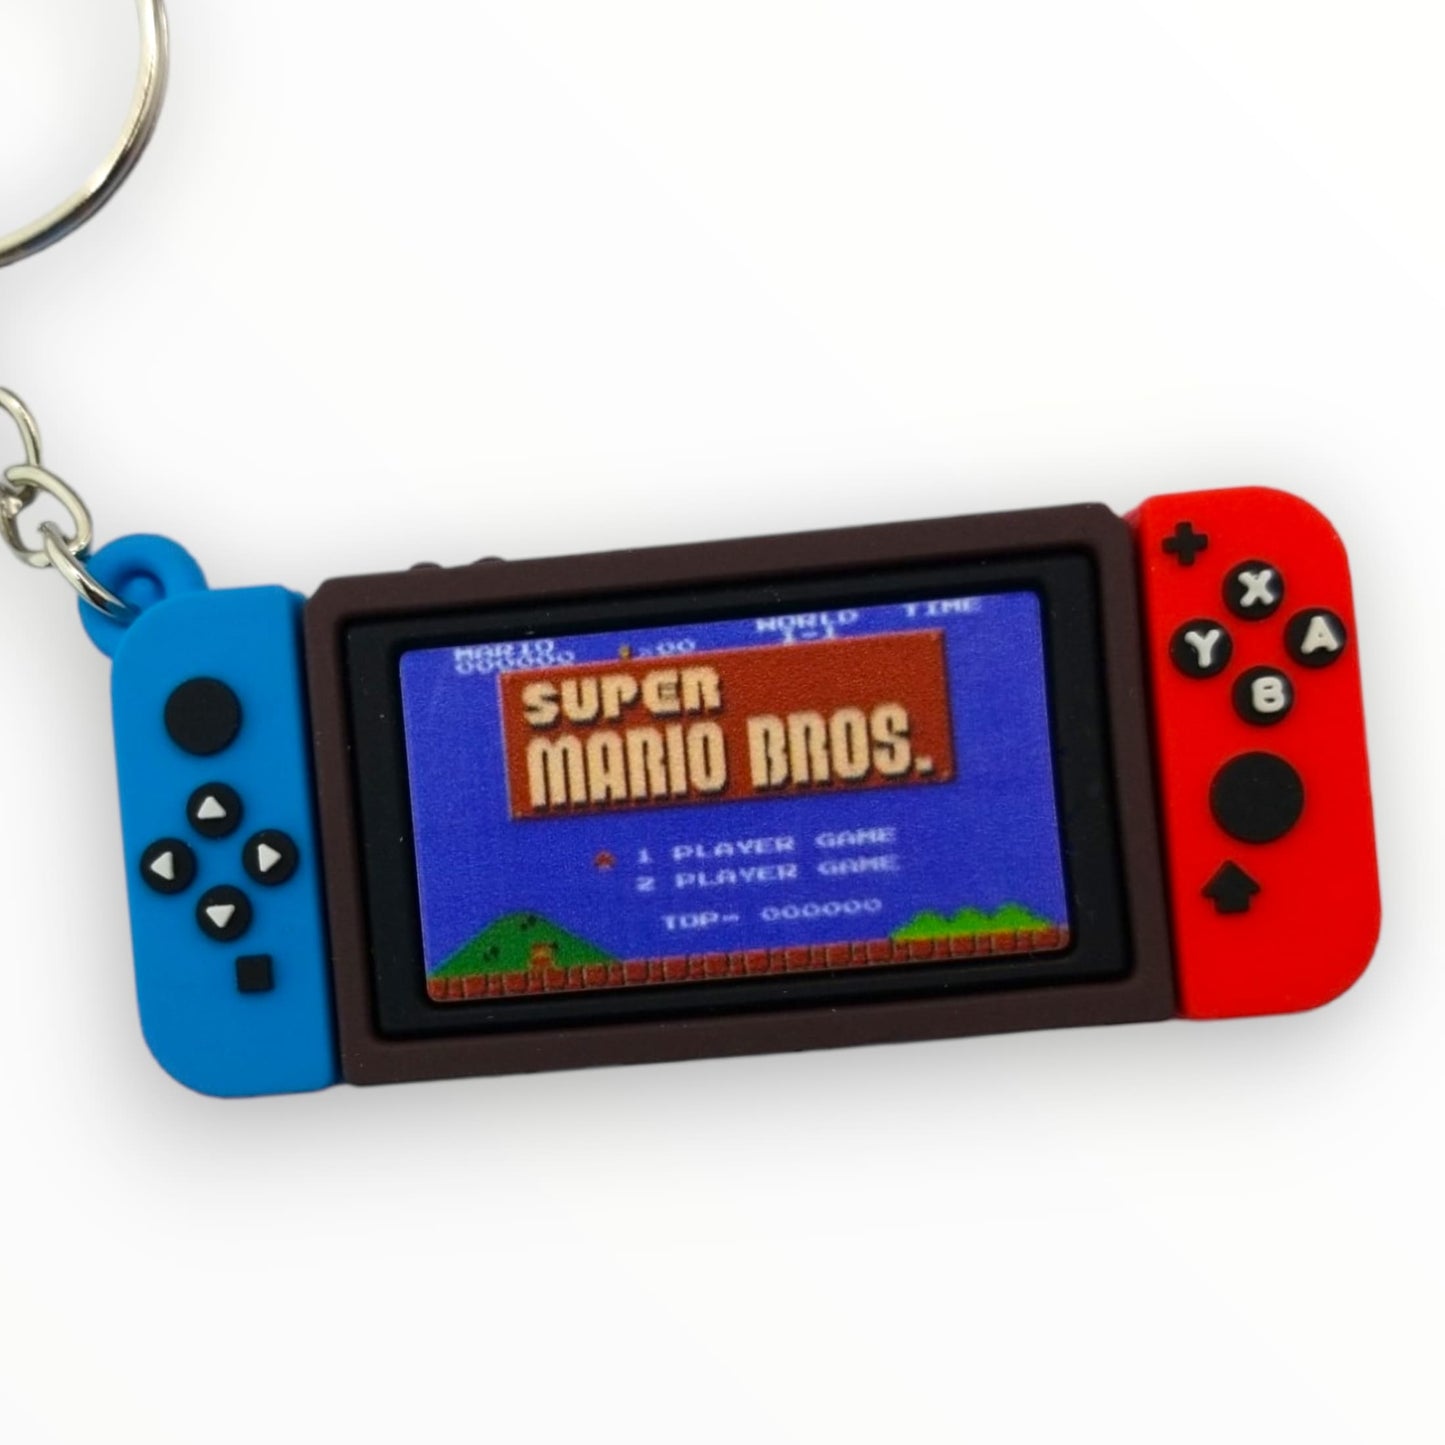 Nintendo Switch Super Mario Controller Replica Keychain from Confetti Kitty, Only 10